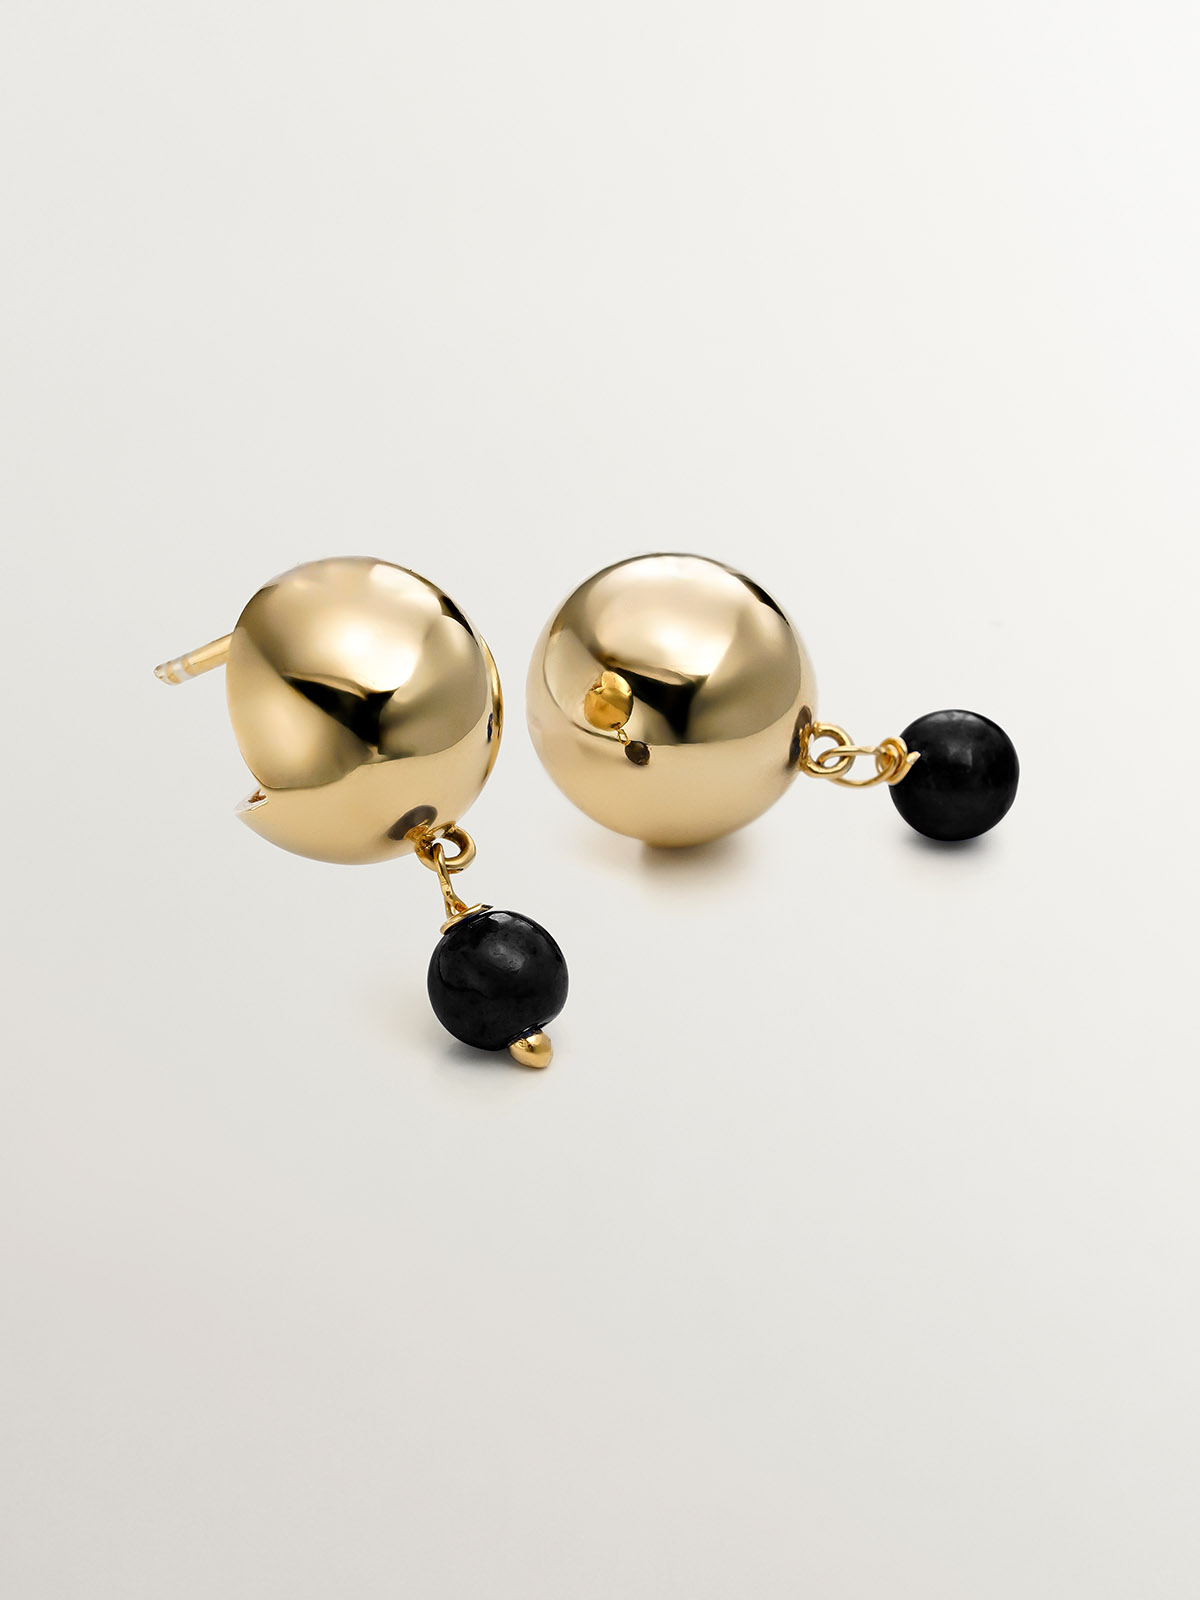 925 silver earrings bathed in 18k yellow gold with black ónix